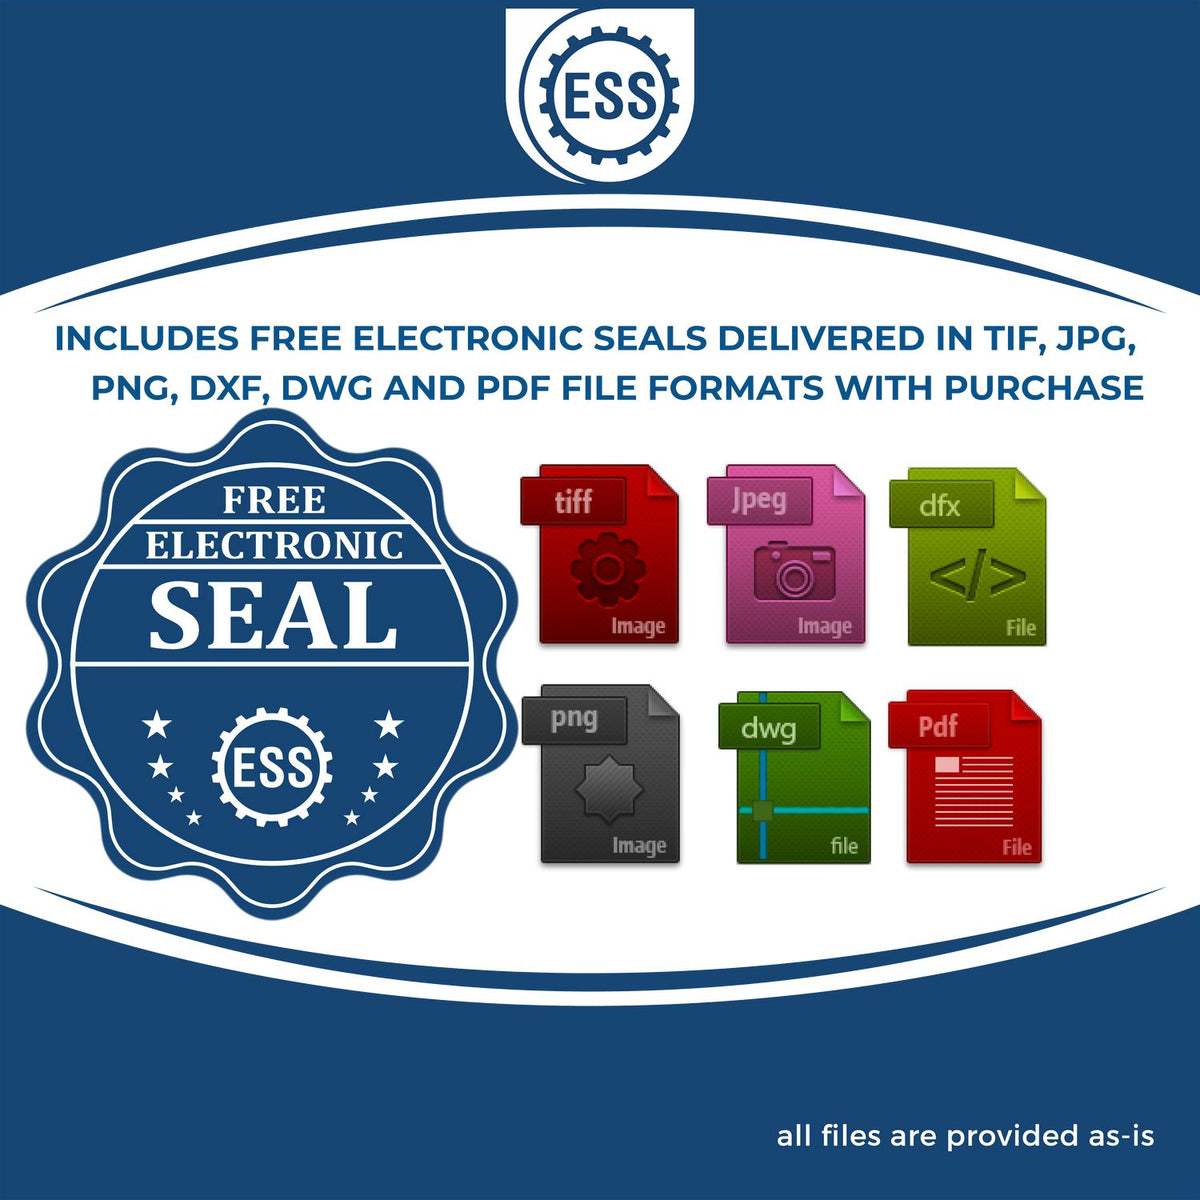 An infographic for the free electronic seal for the Self-Inking Oklahoma Geologist Stamp illustrating the different file type icons such as DXF, DWG, TIF, JPG and PNG.